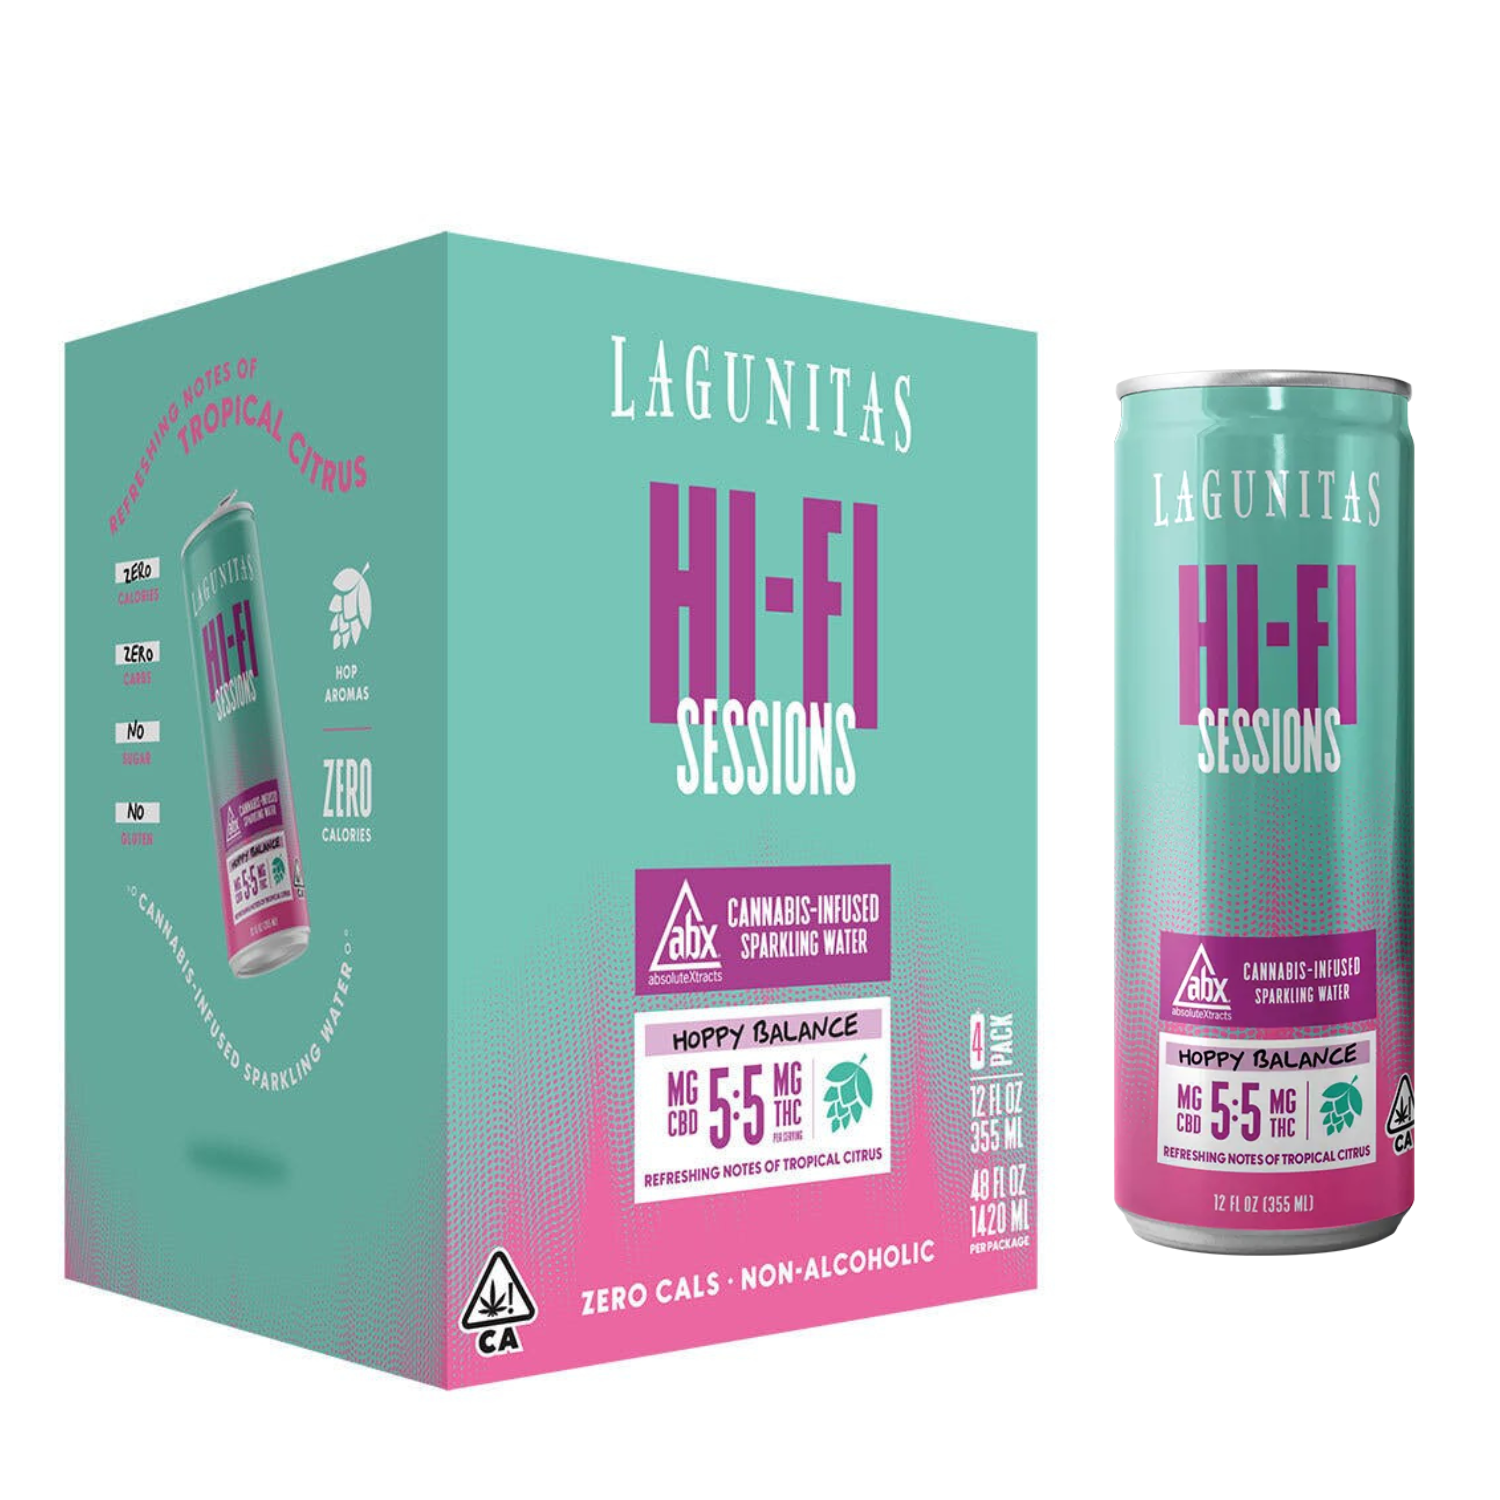 Hi-Fi Sessions: Hoppy Balance Cannabis Infused Sparkling Water